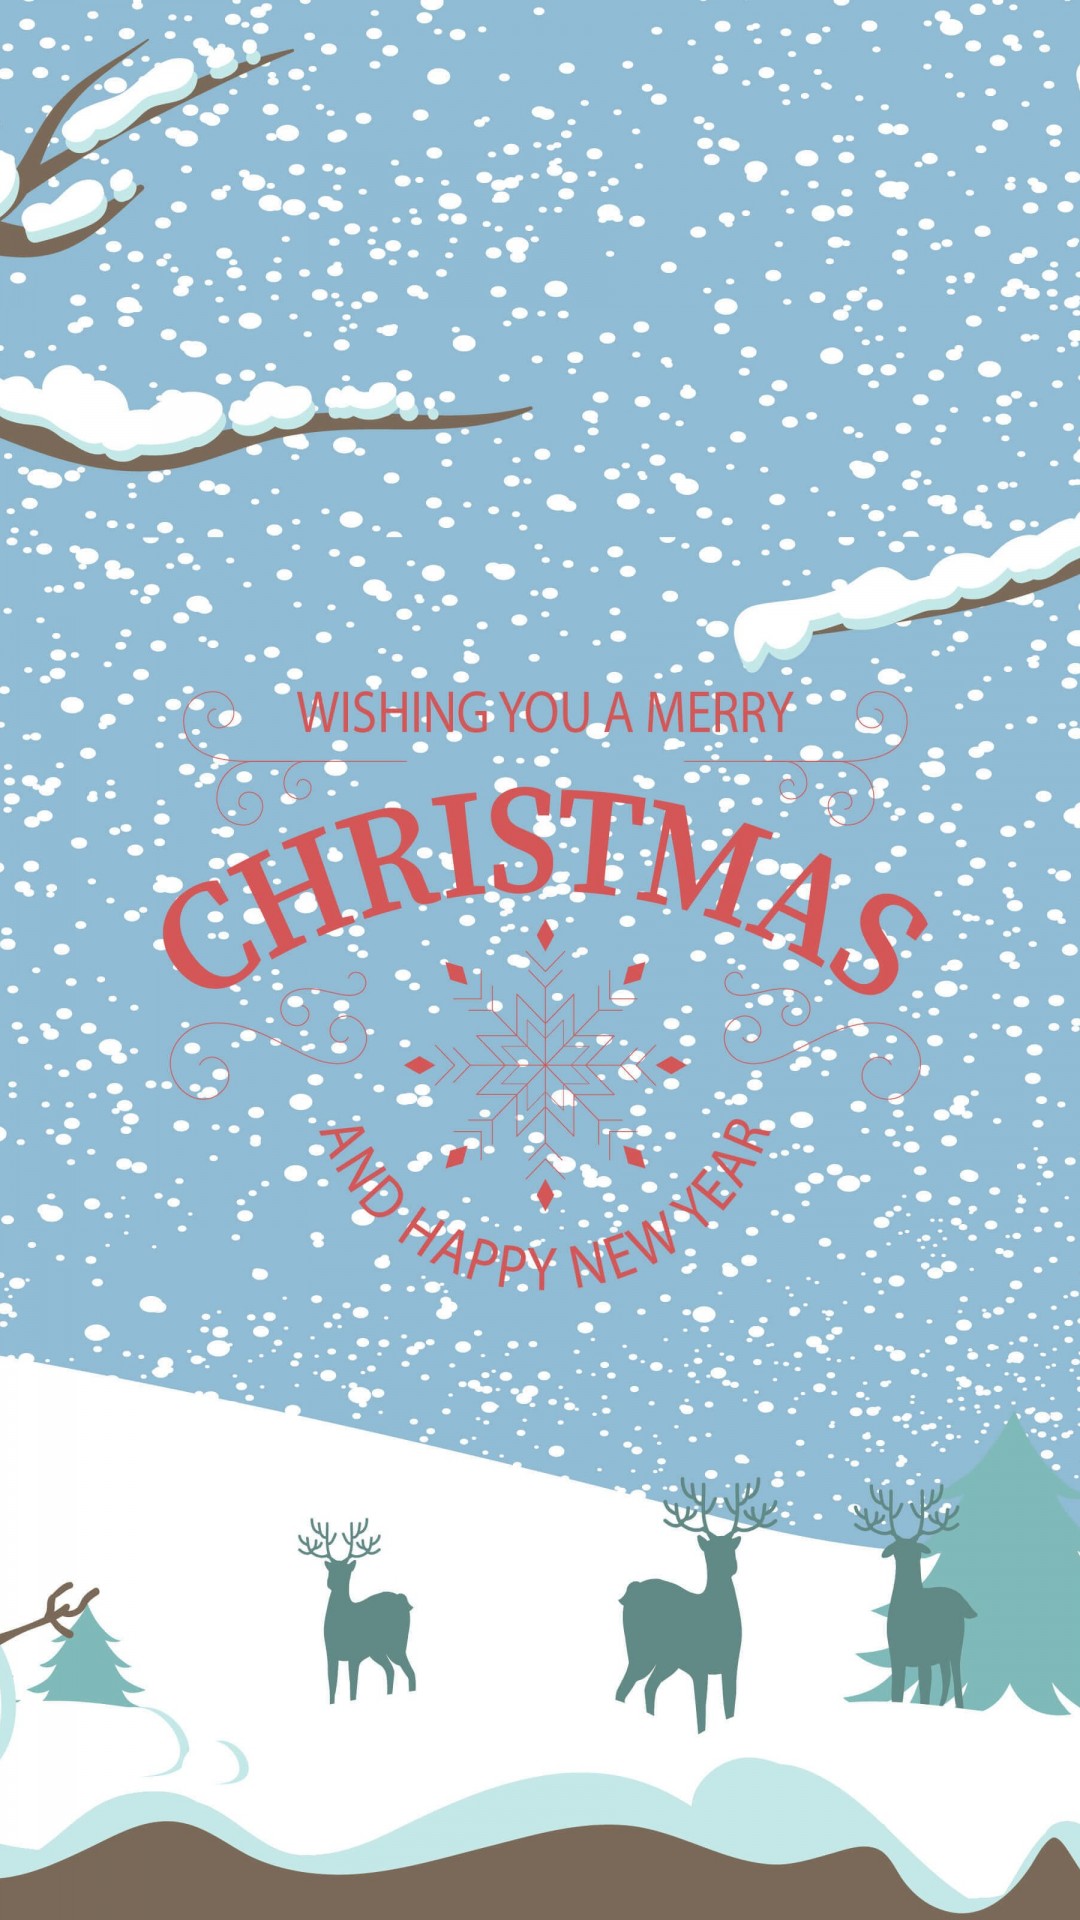 Merry Christmas Illustration Wallpaper for SAMSUNG Galaxy S4